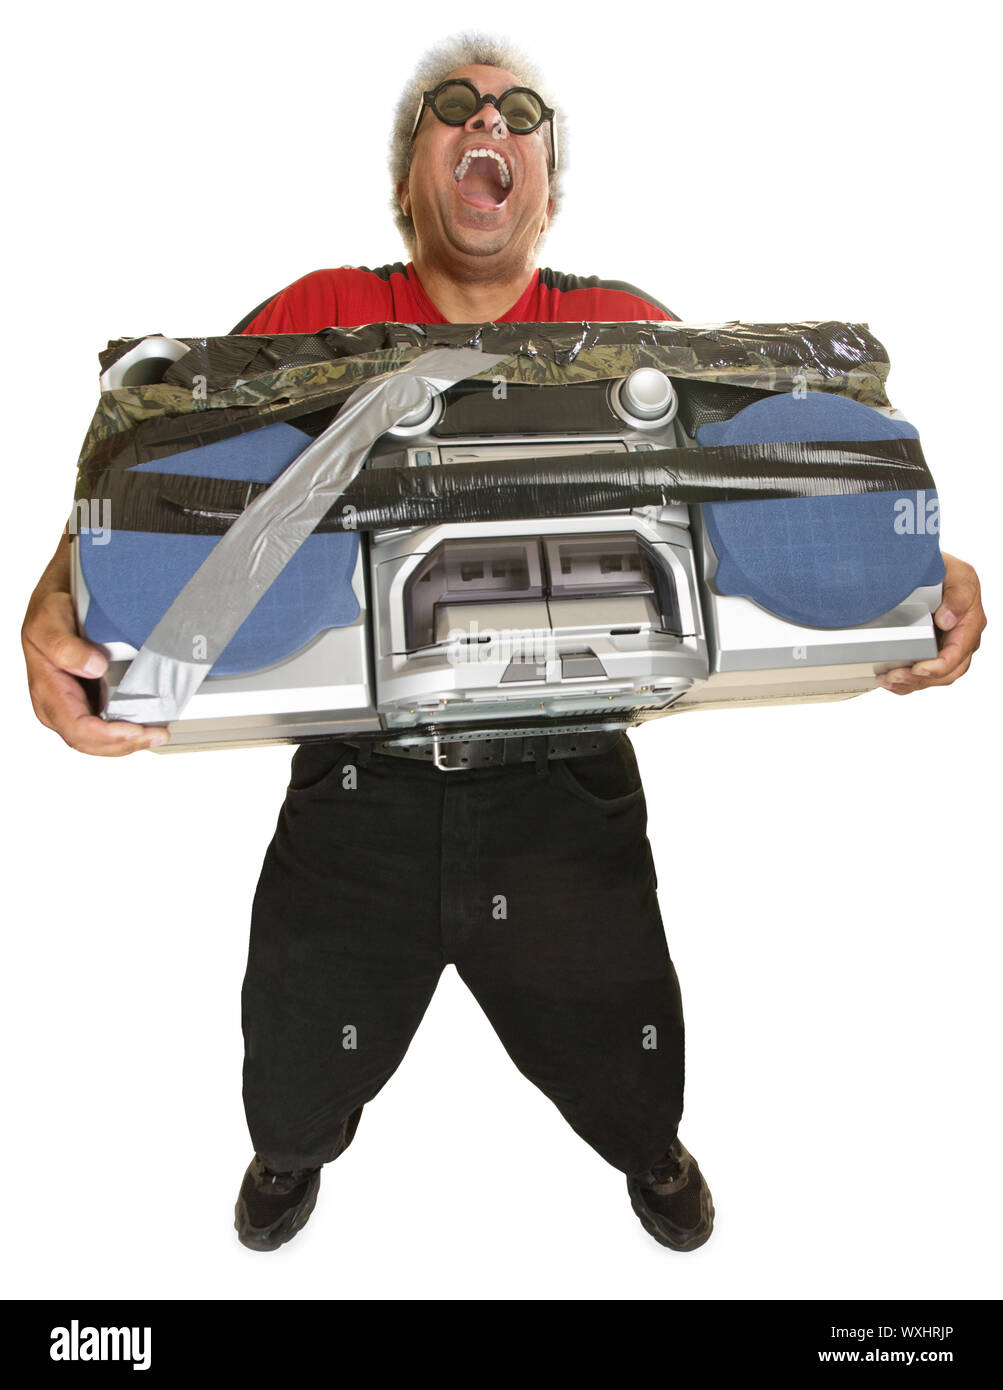 Hysterical man with sunglasses and taped boom box Stock Photo